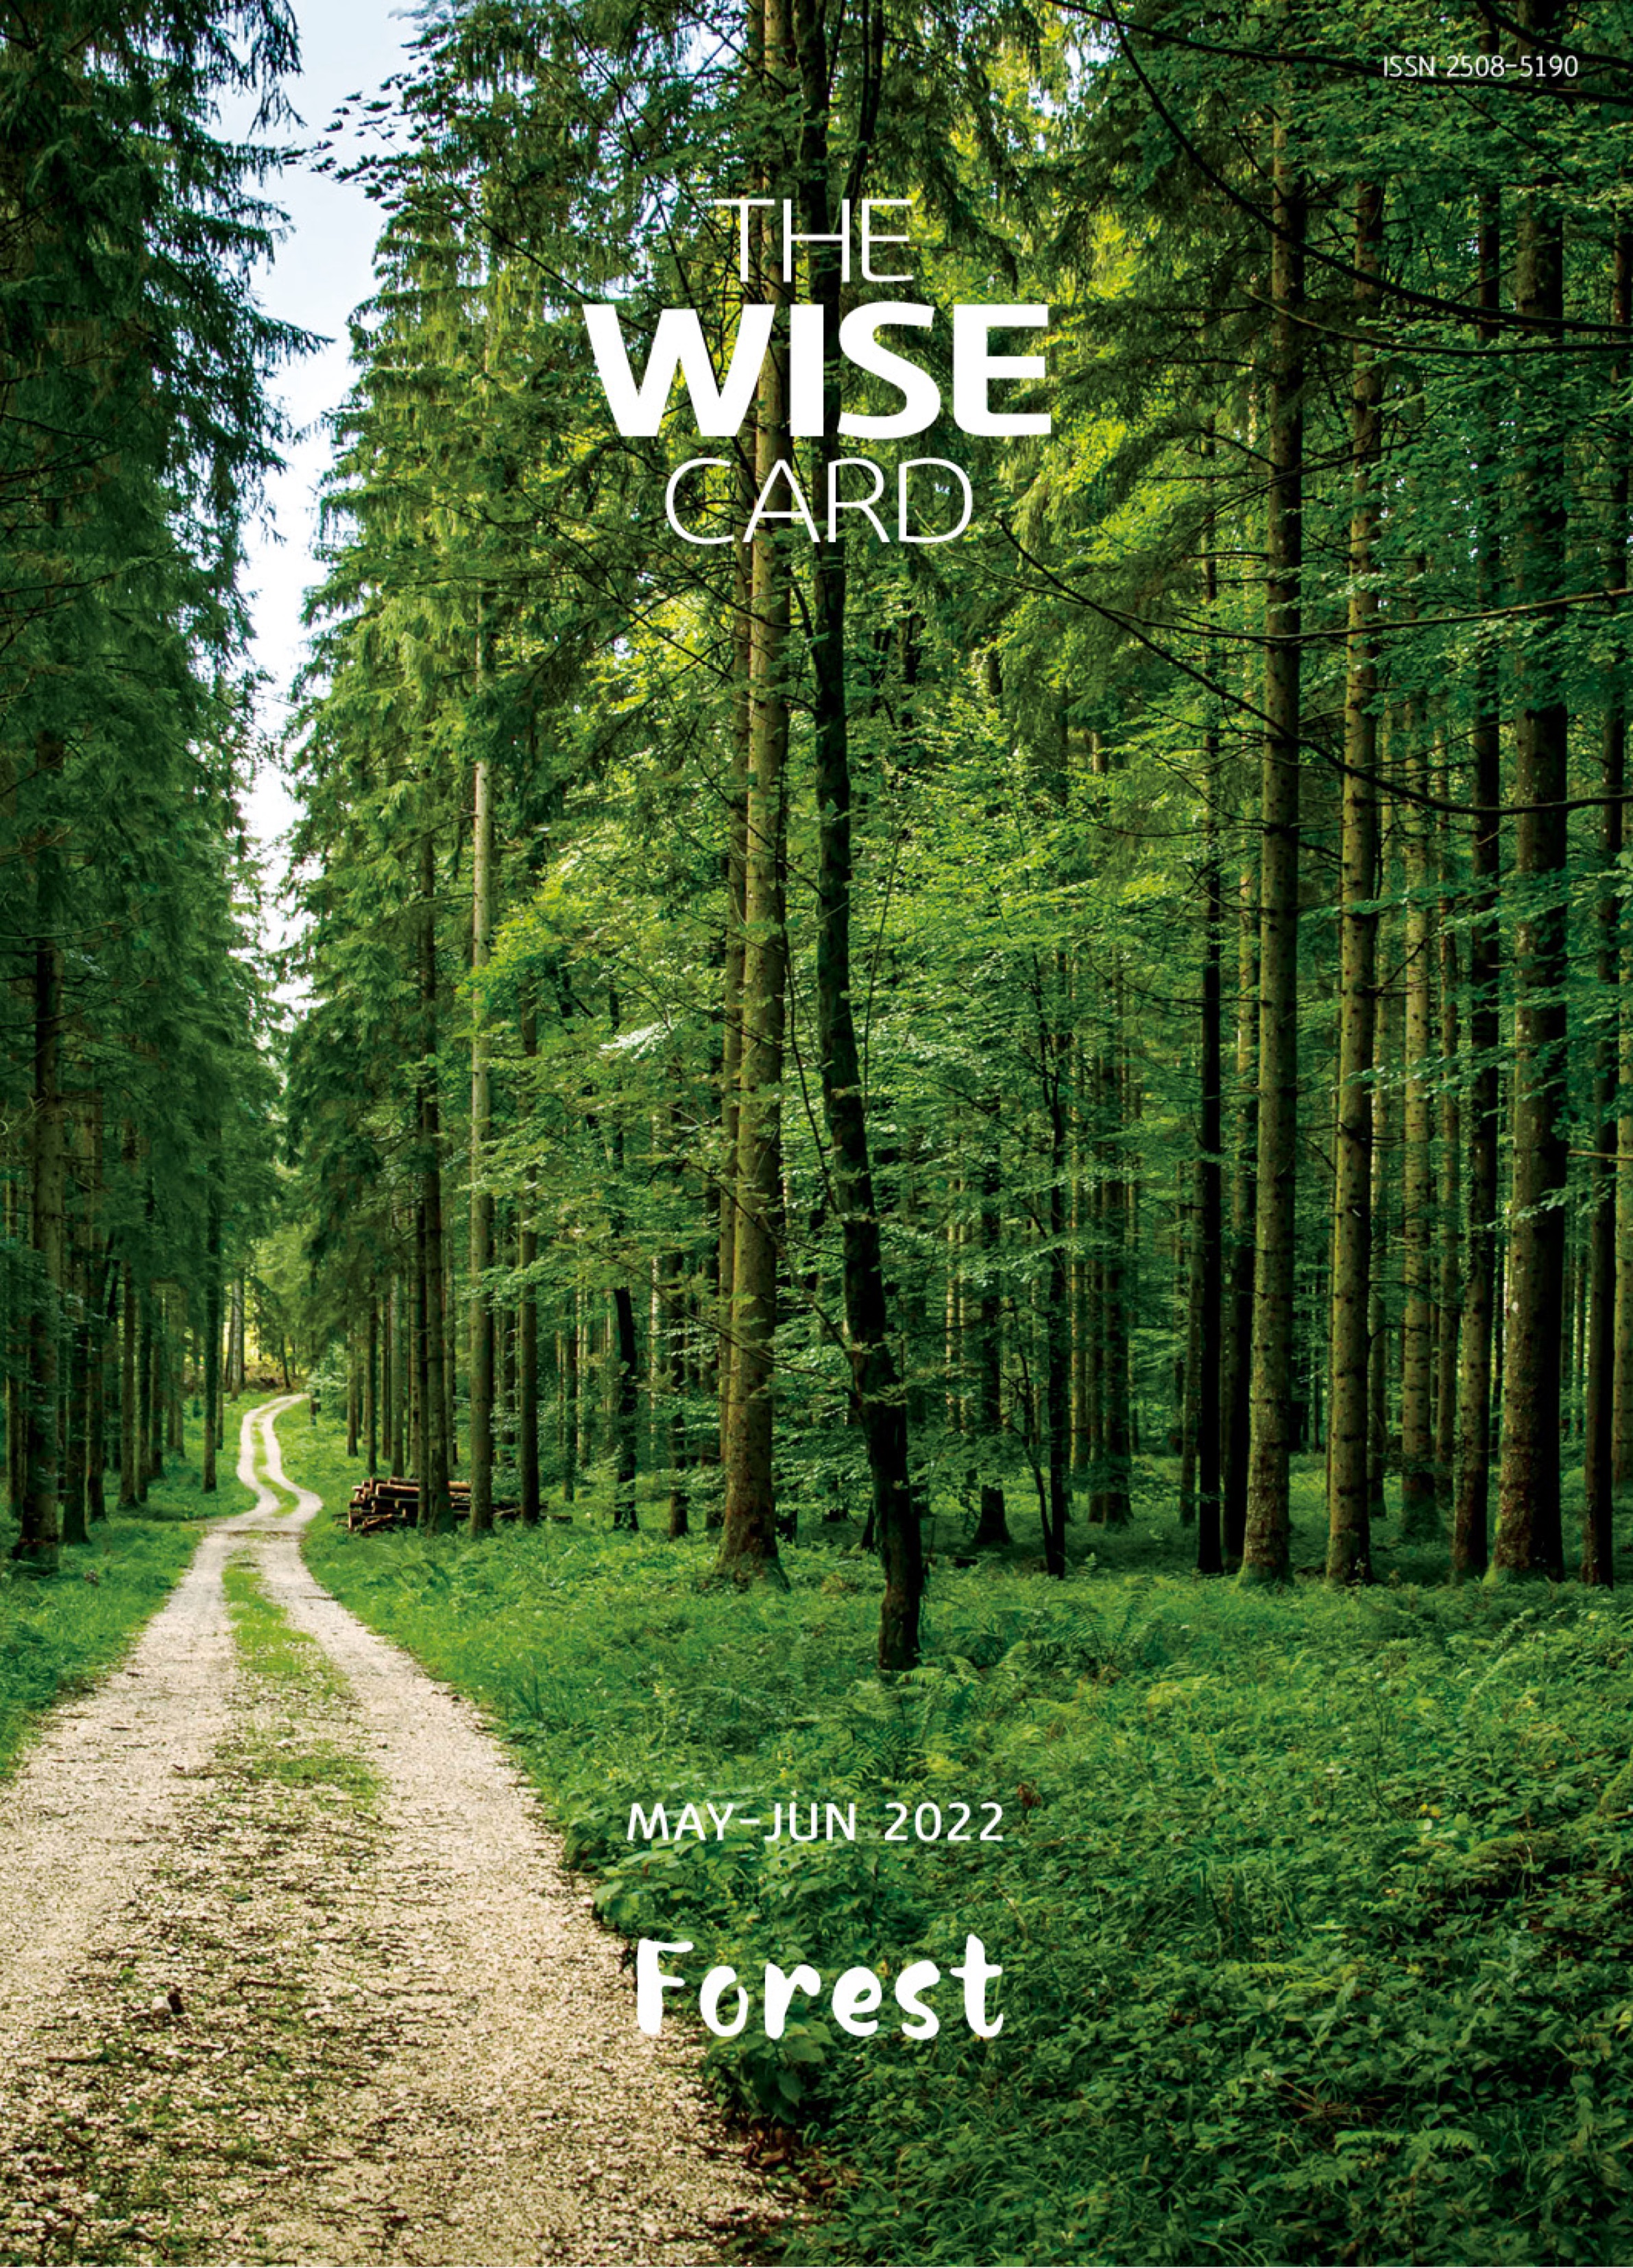 THE WISE CARD MAY-JUNE 2022 walk